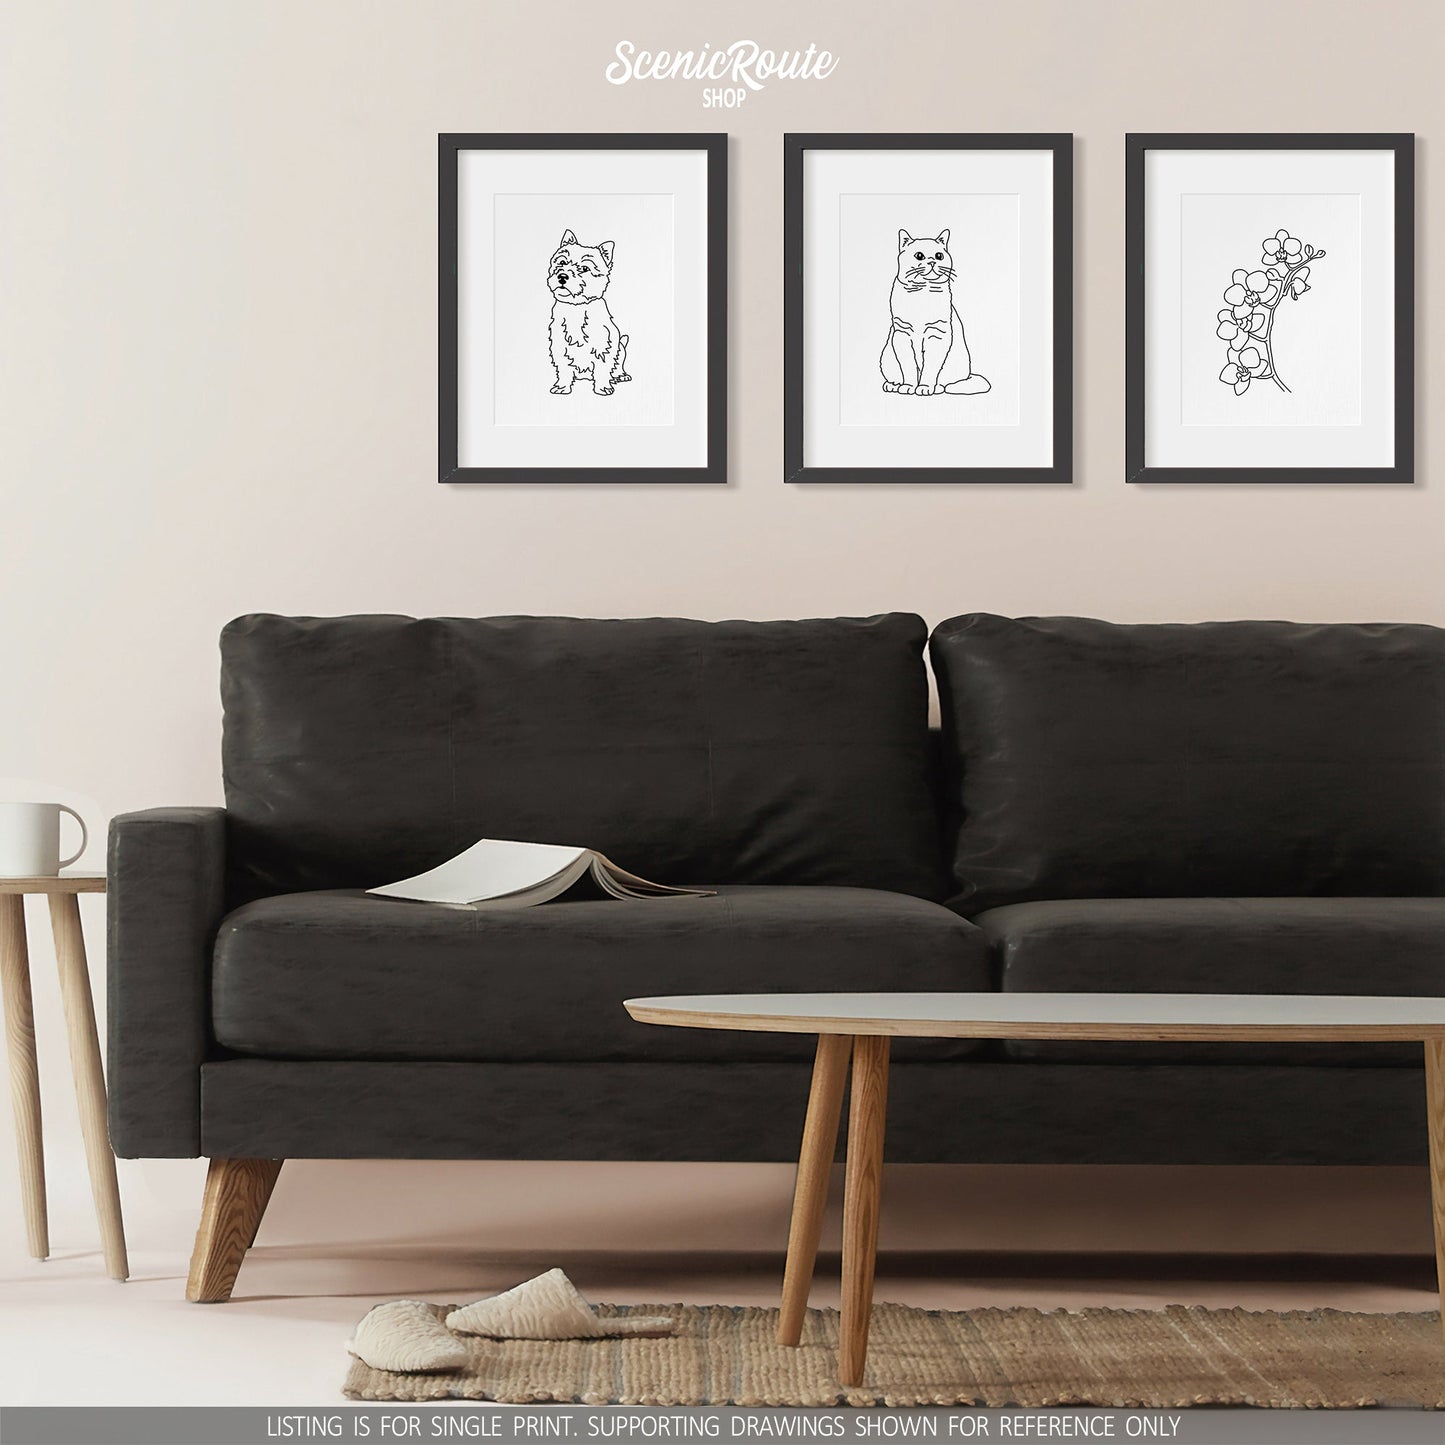 A group of three framed drawings on a white wall above a couch. The line art drawings include a Norwich Terrier dog, a British Shorthair cat, and an Orchid Flower